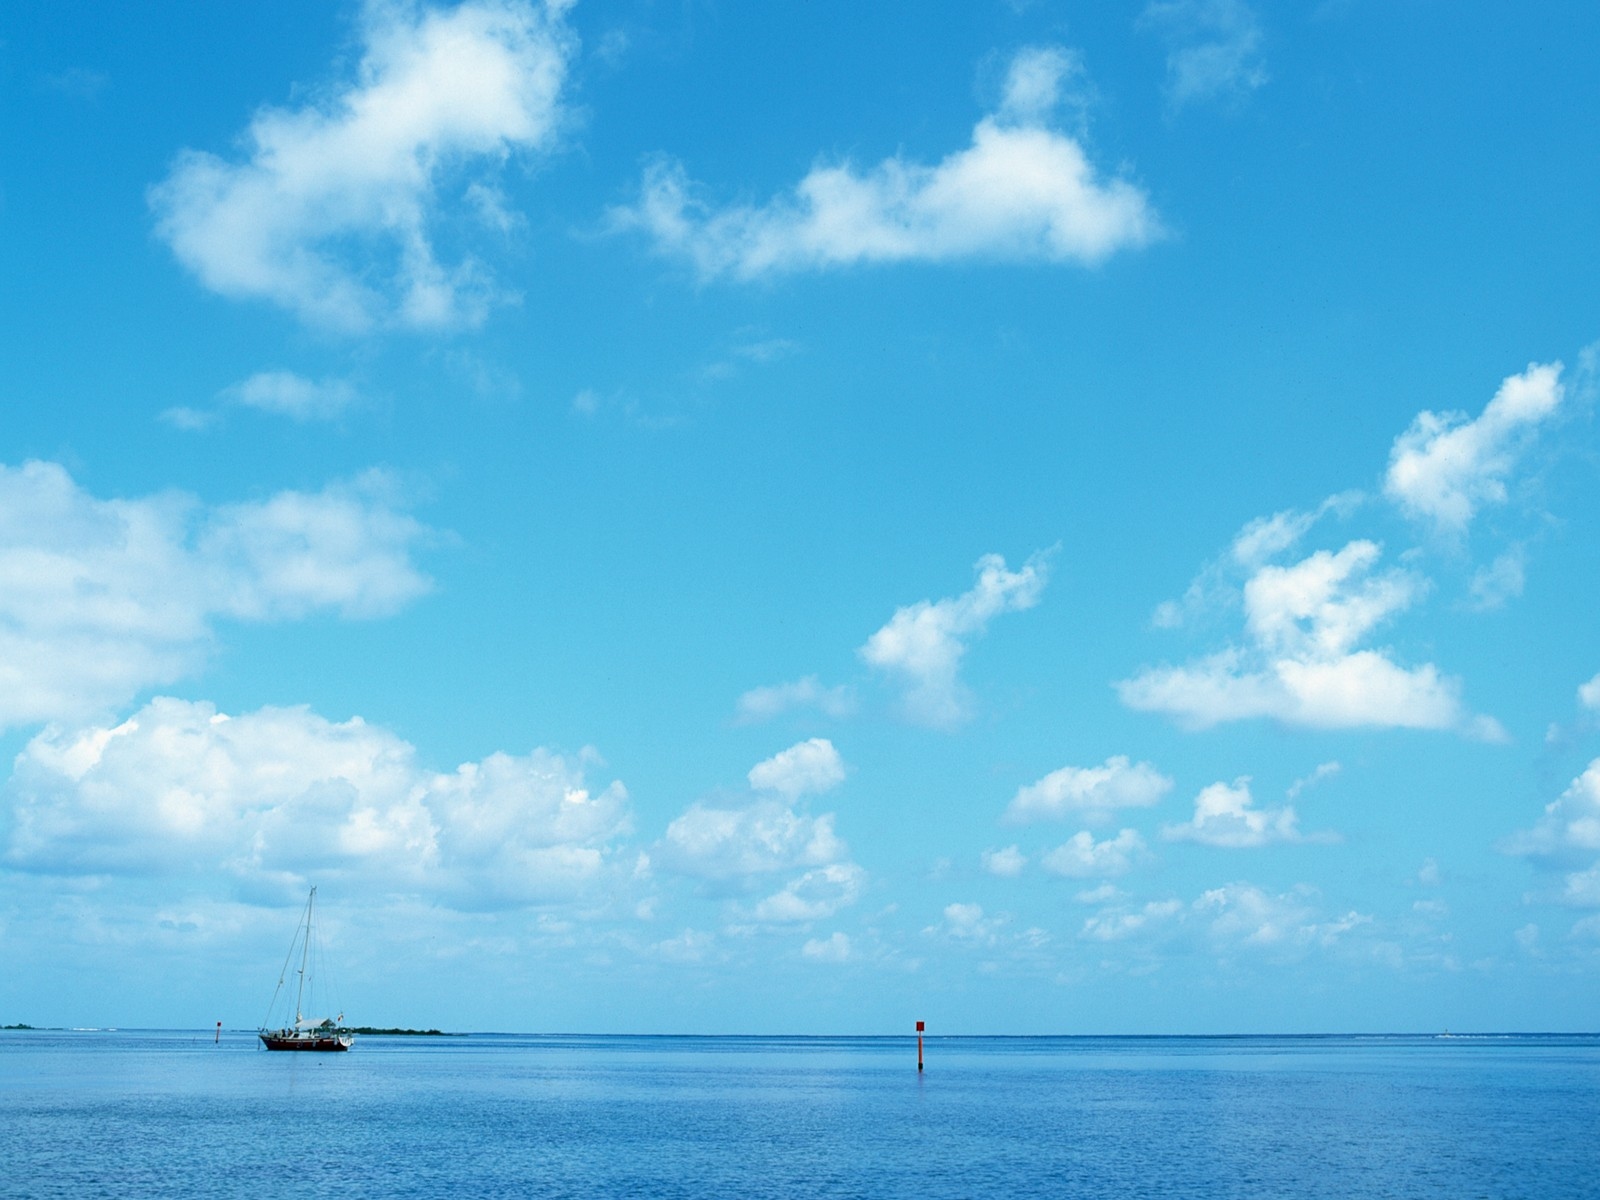 Hd 1600x1200 Sea And Clouds Desktop Wallpapers Backgrounds